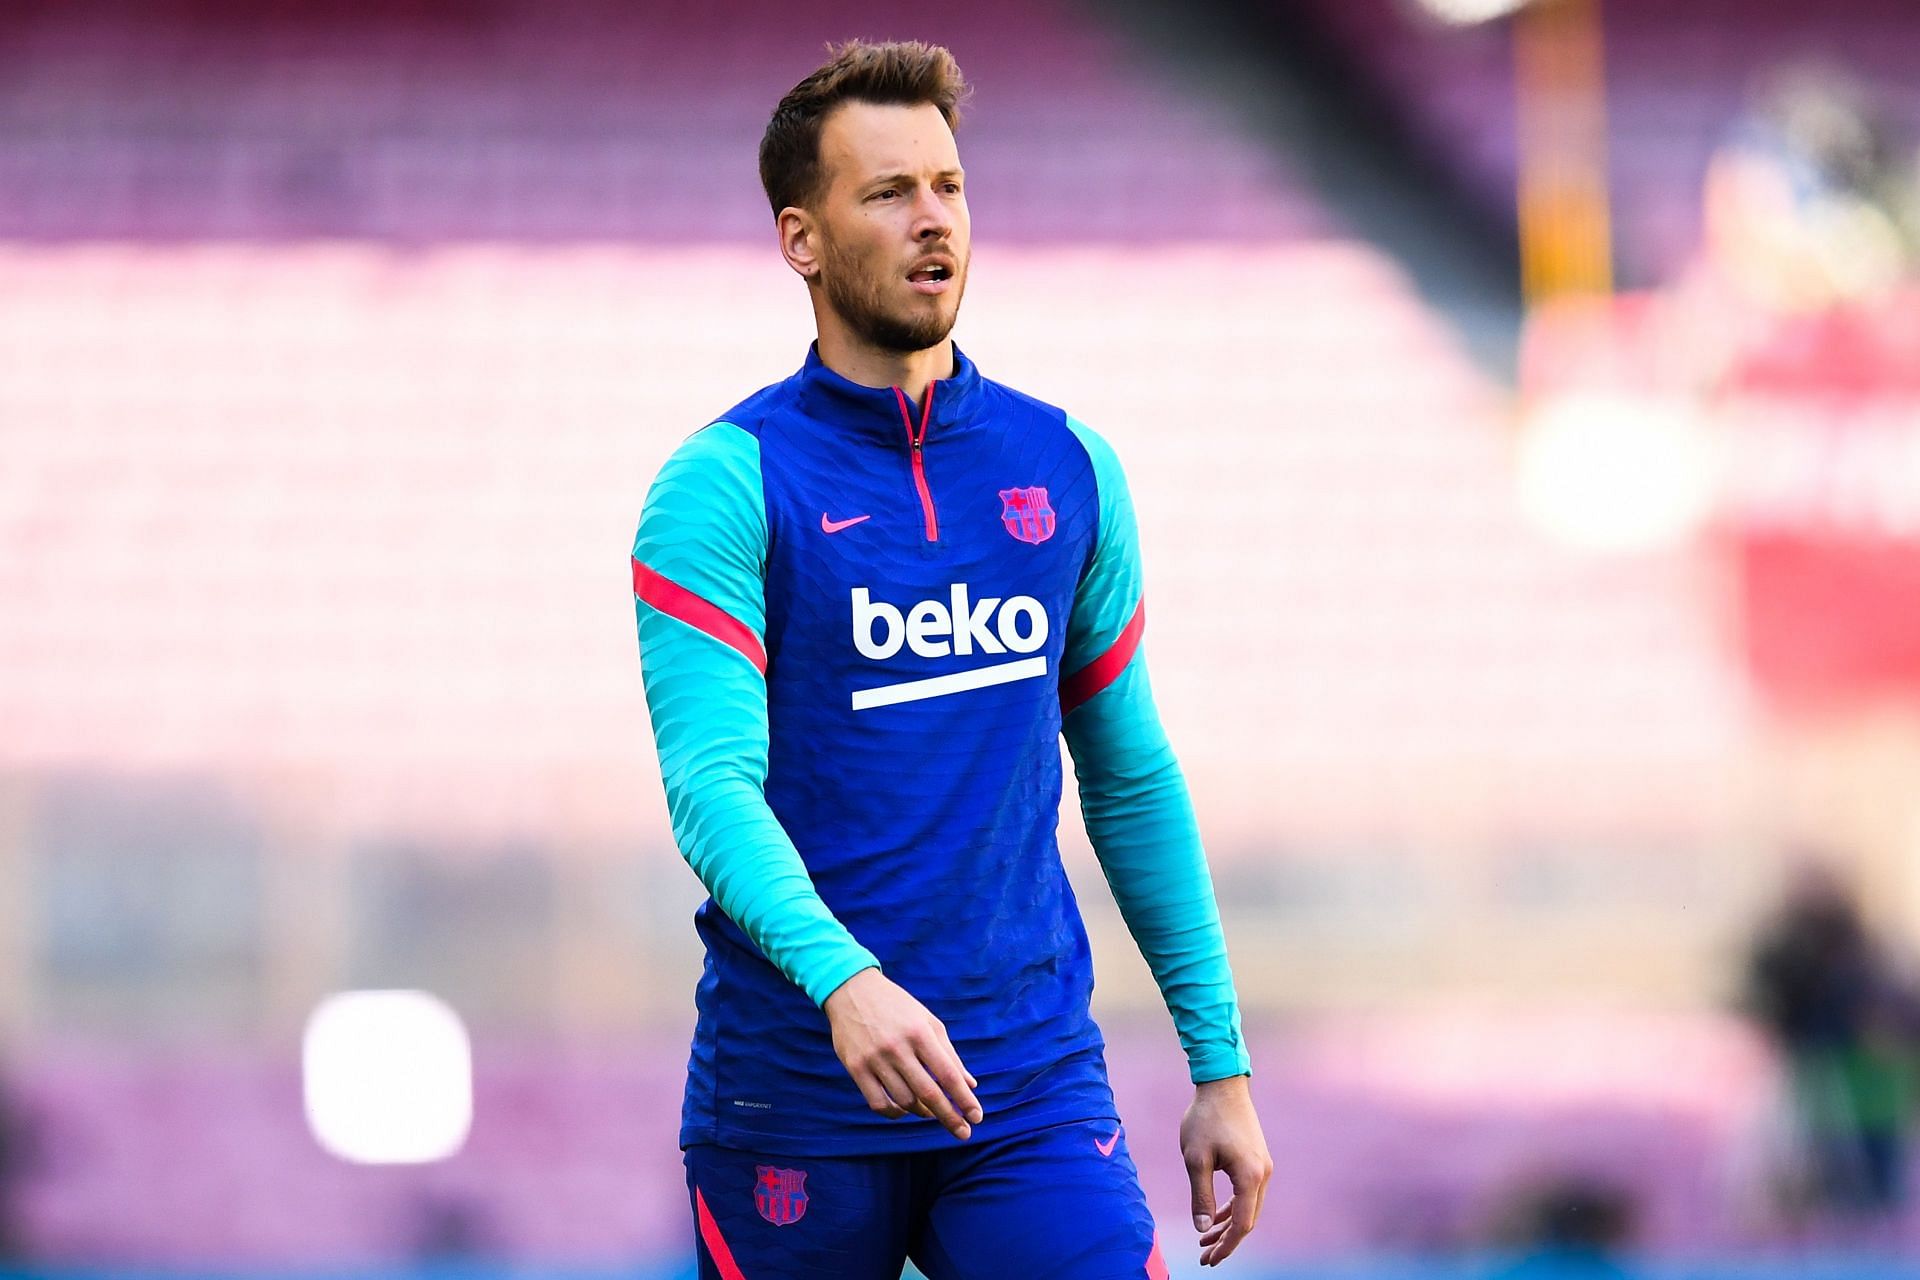 Arsenal are planning a loan move for Neto in January